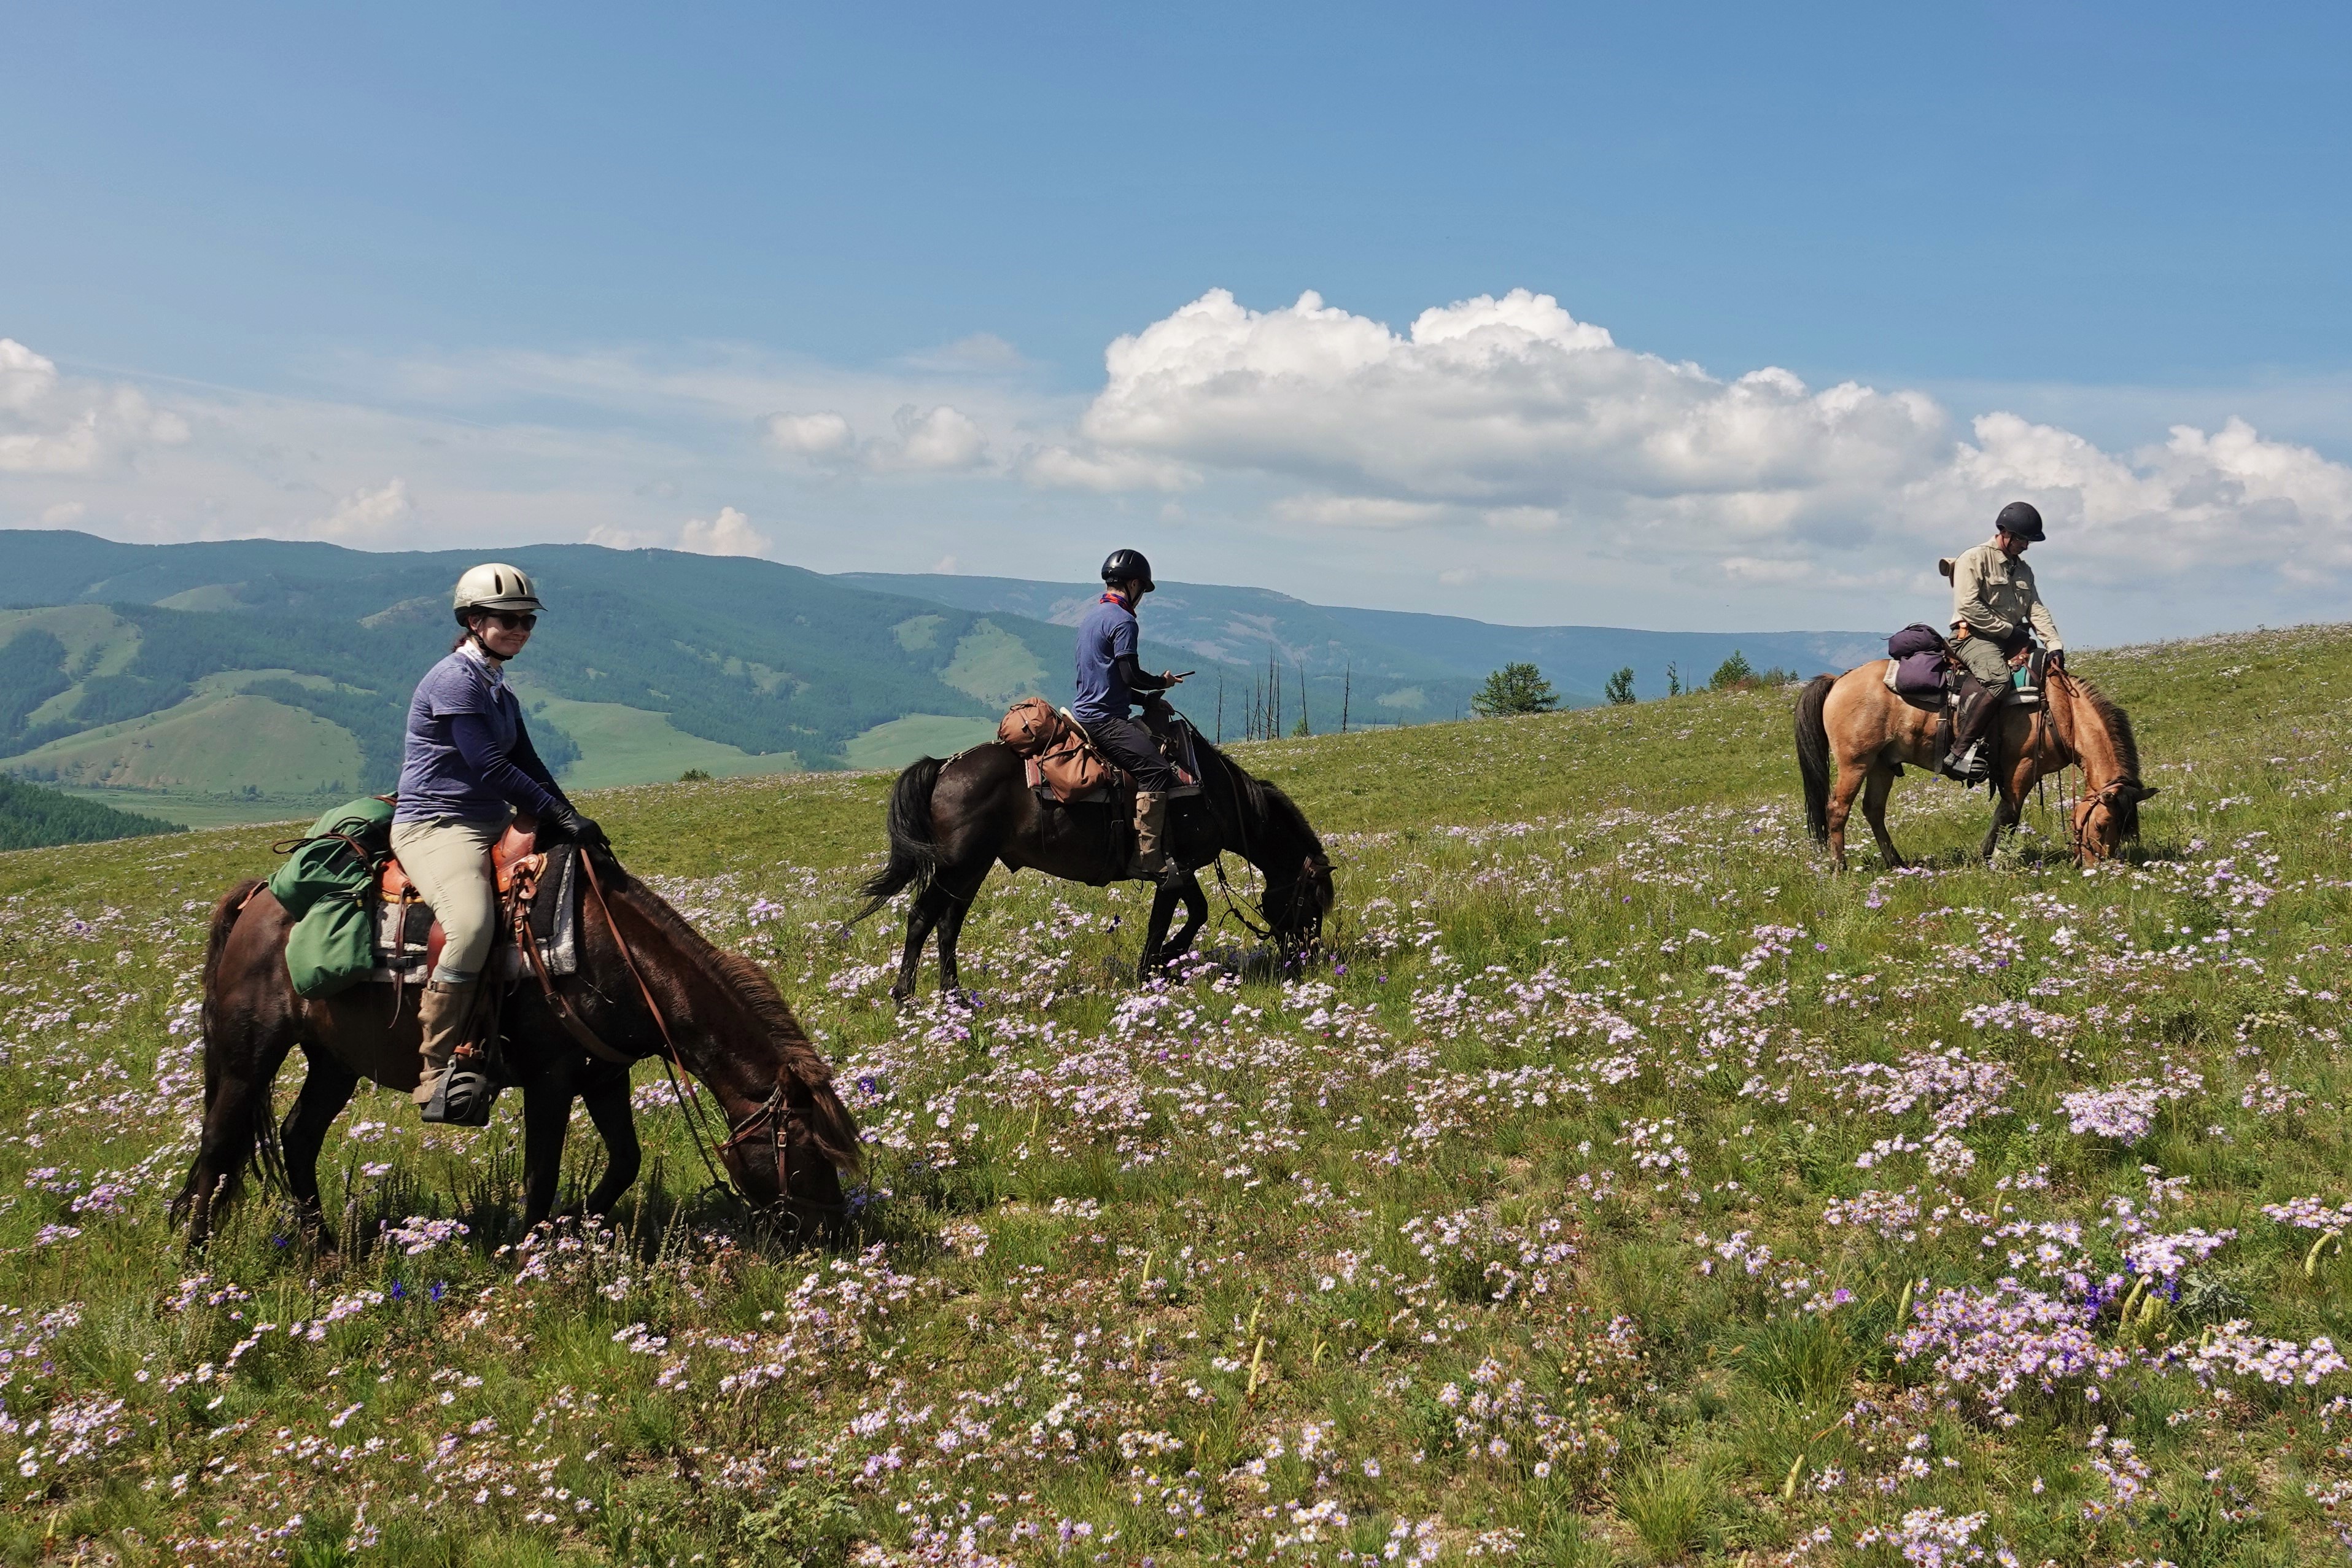 Horses, the Dawn of Arts and Forgotten Dreams, Horseback Travel in Mongolia